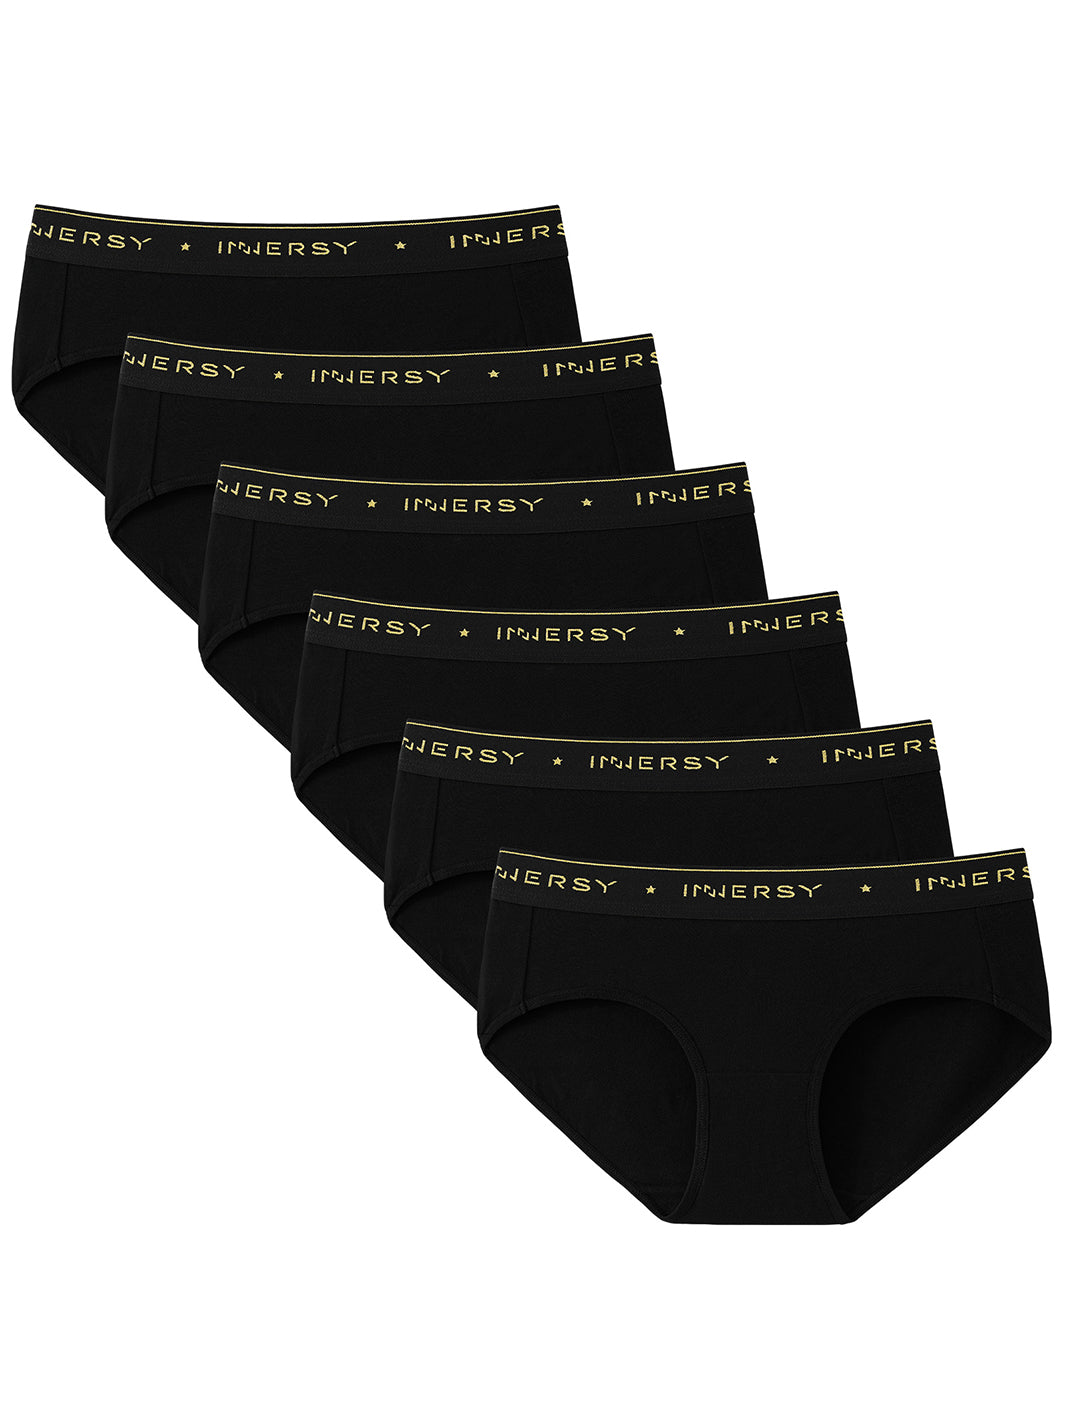 Buy INNERSY Womens Underwear Cotton Hipster Panties Regular & Plus Size  6-Pack(X-Small,Dark Vintage) at